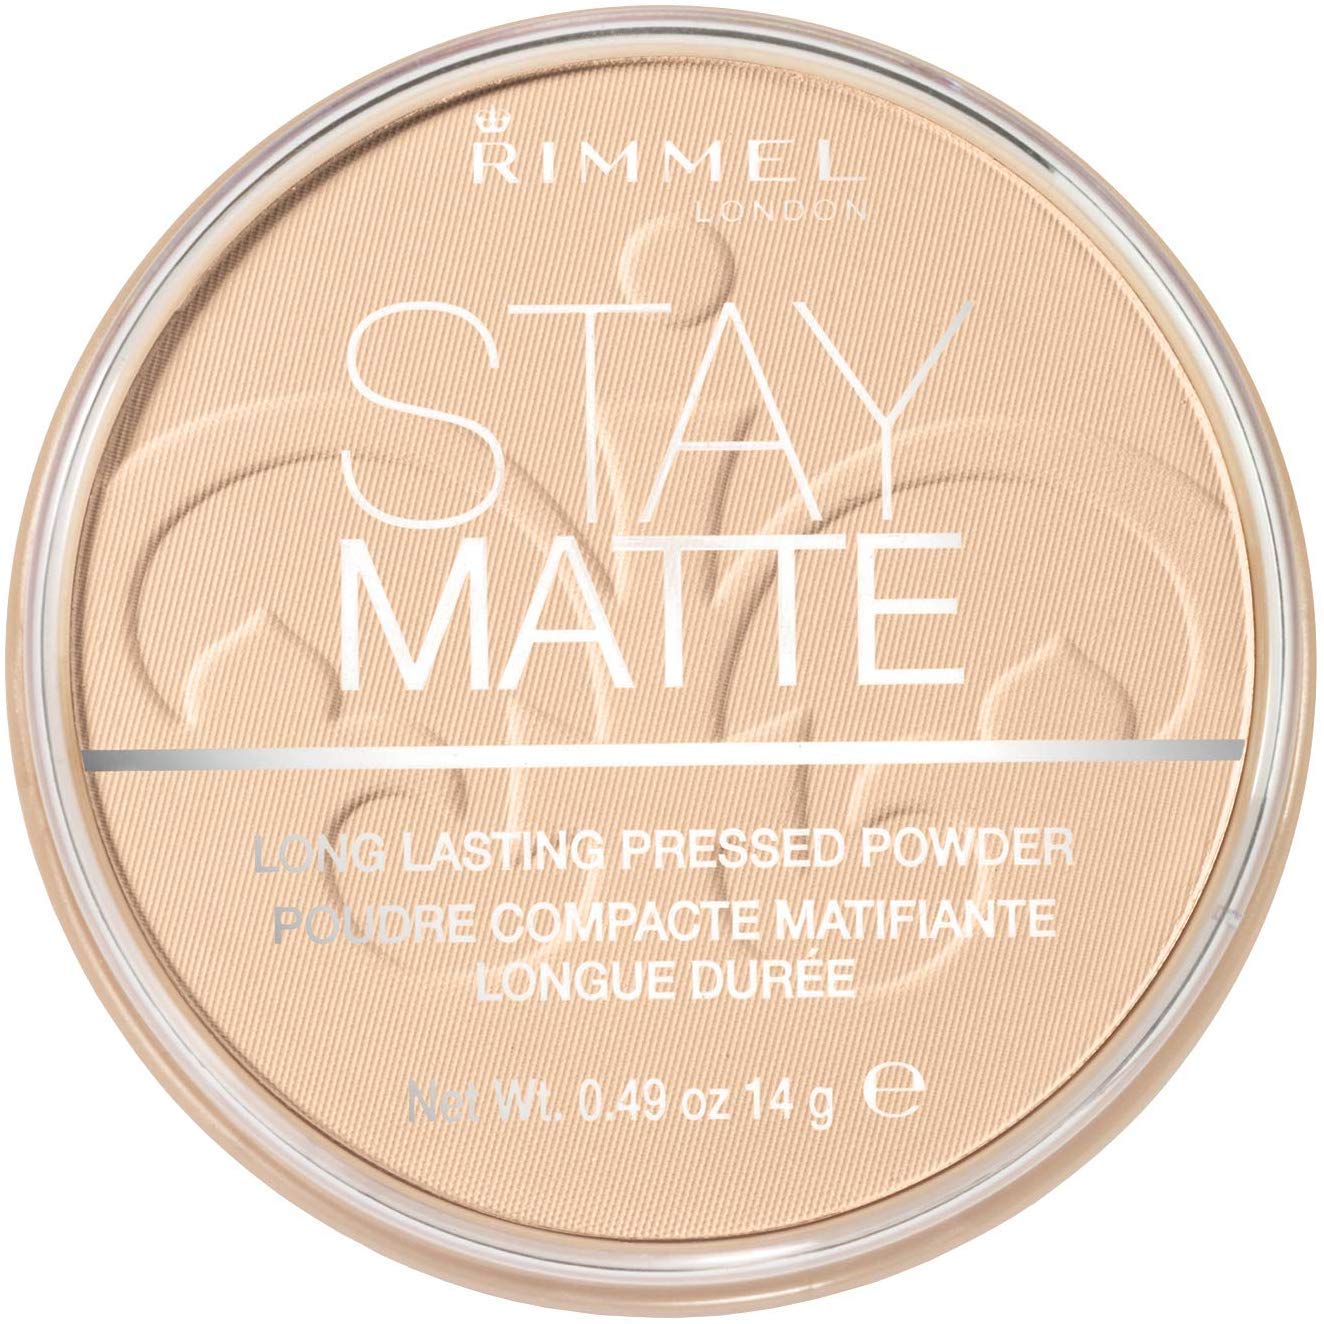 Rimmel London Stay Matte Long Lasting Pressed Powder, Transparent [001] 0.49 Ounce (Pack of 1)